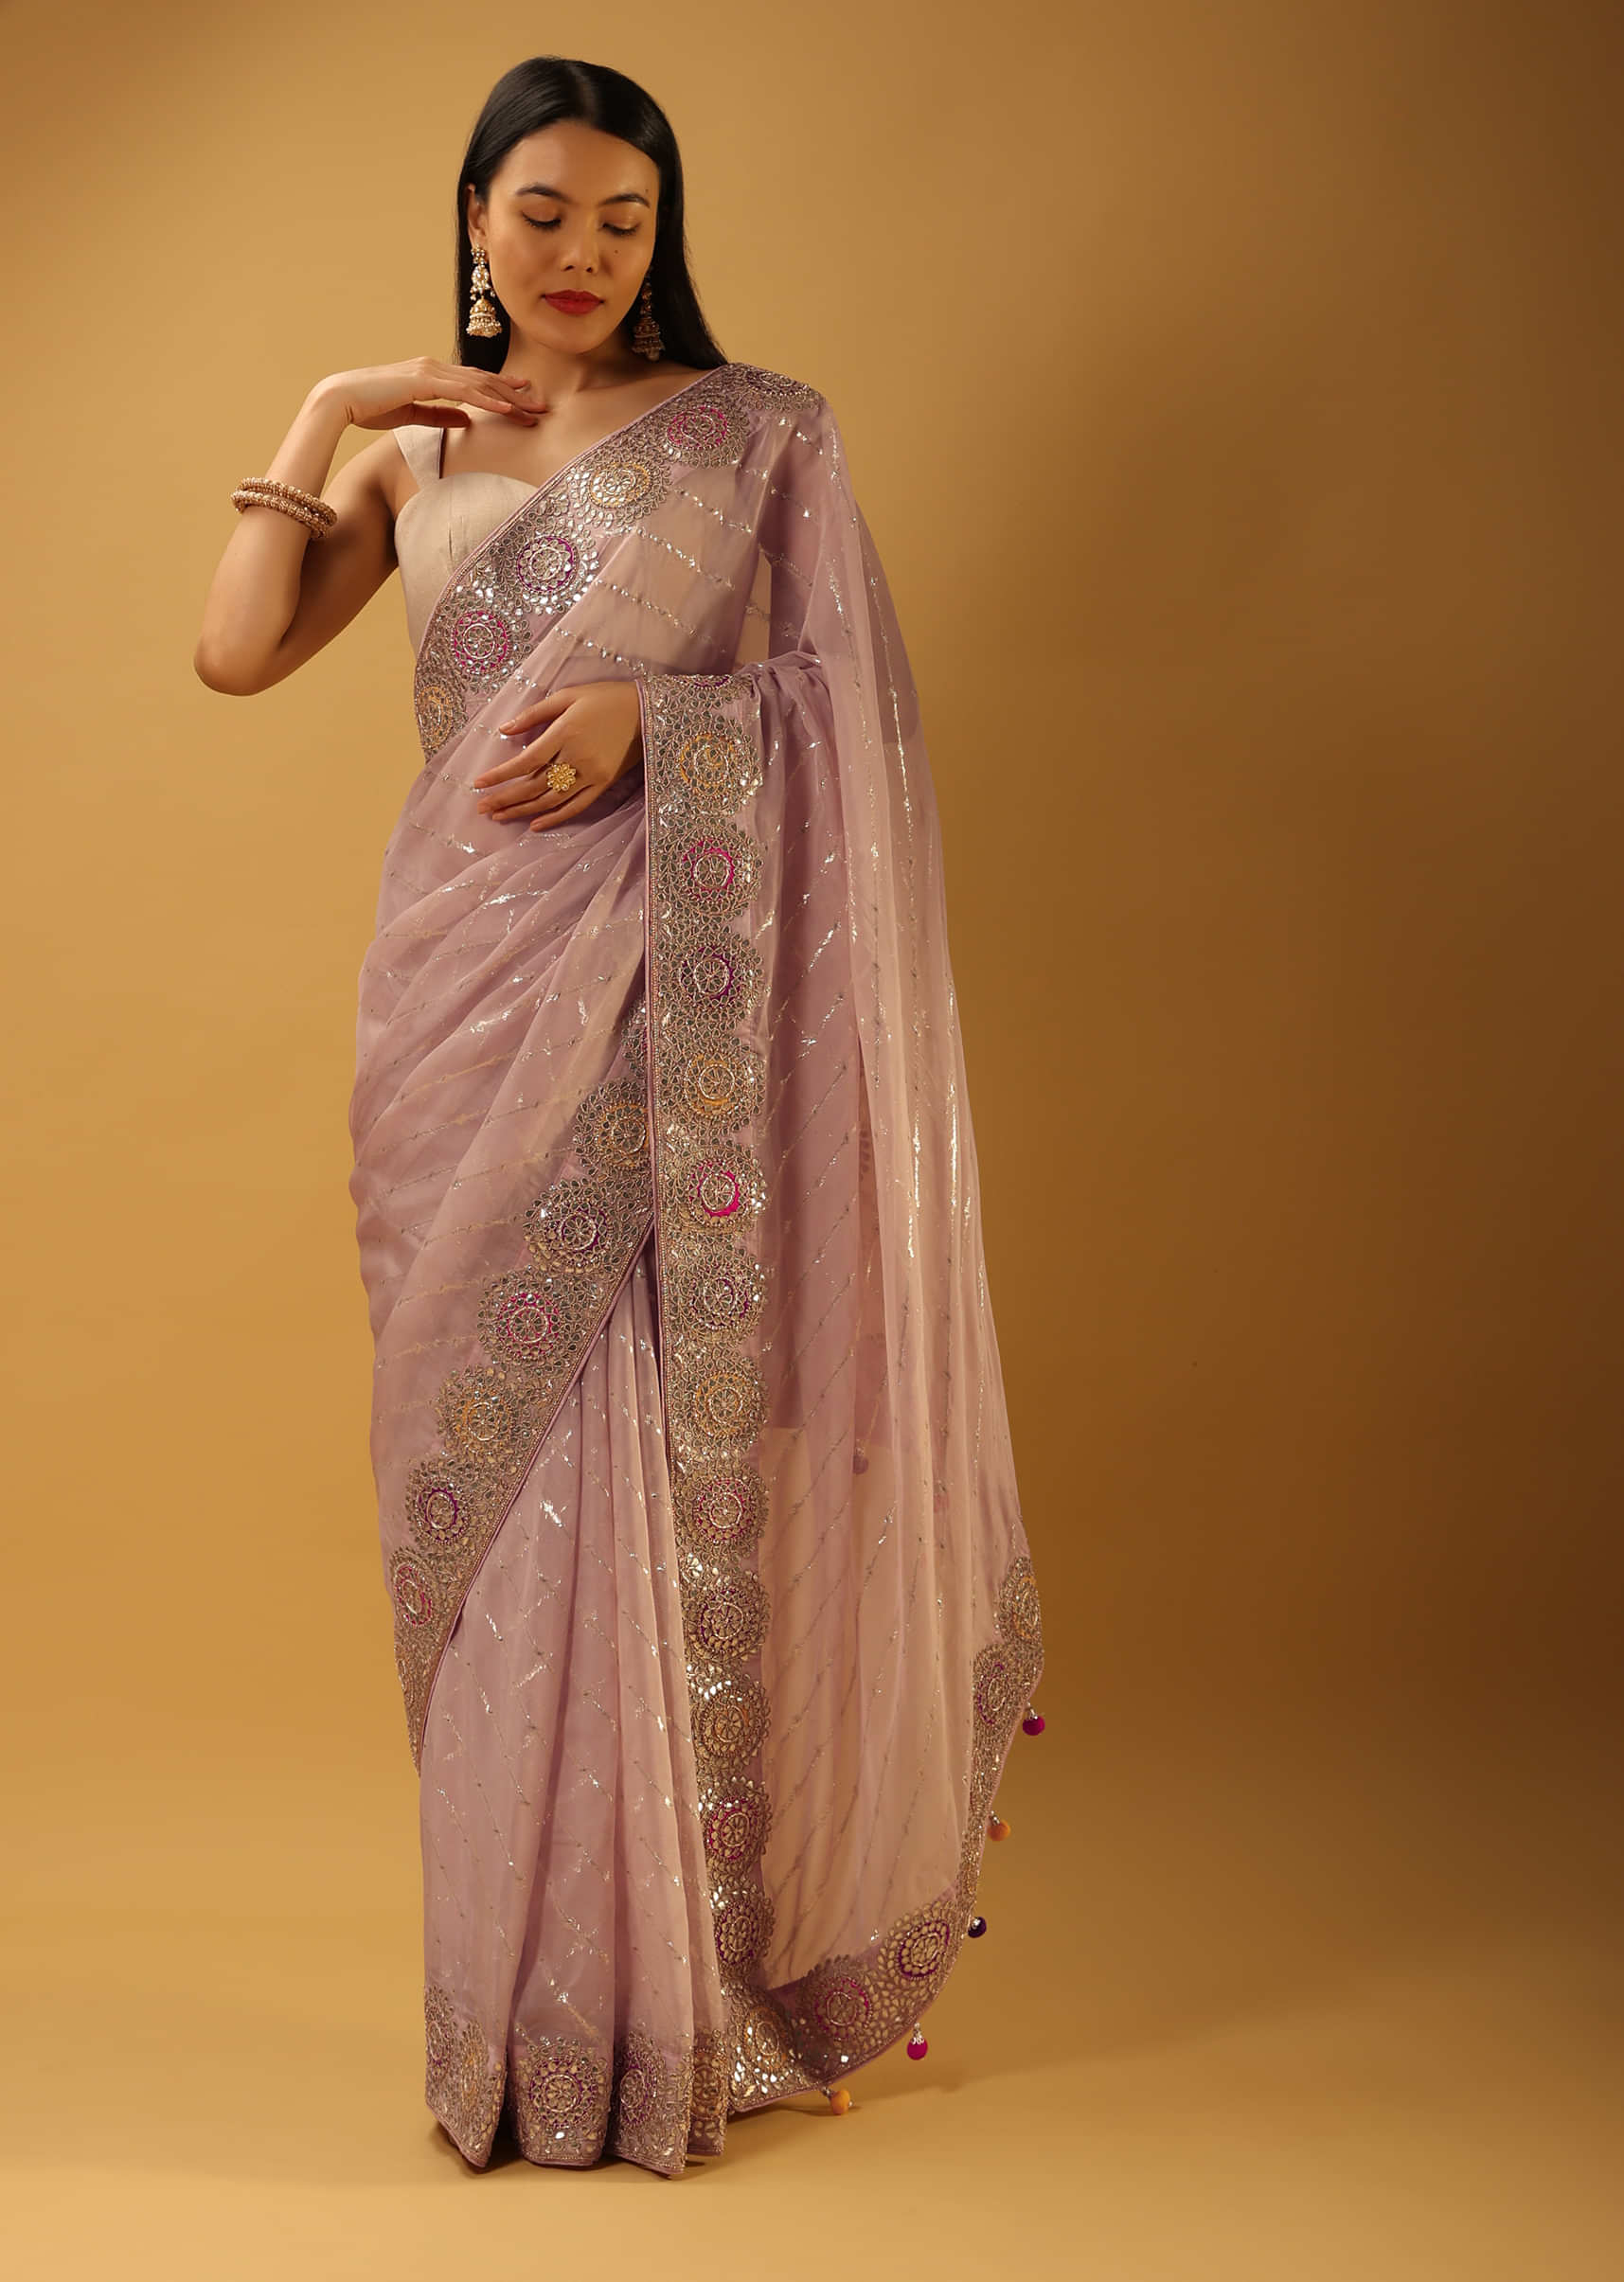 Dusty Lilac Saree In Organza With Lurex Woven Diagonal Stripes And Multi Colored Applique Border 